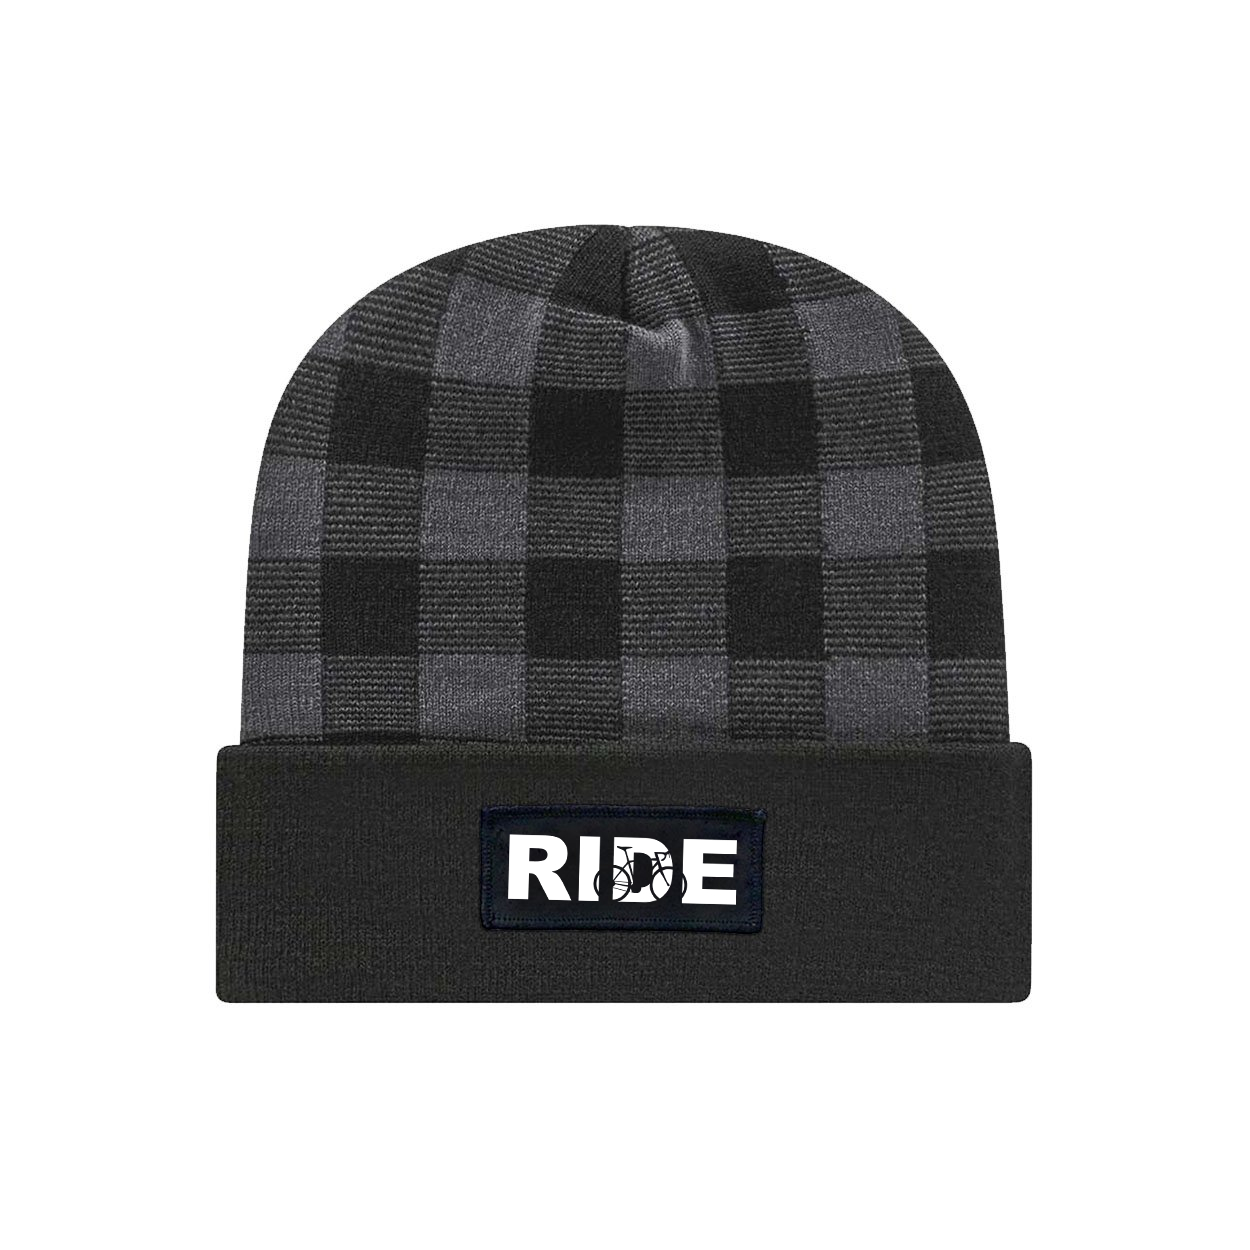 Ride Cycle Logo Night Out Woven Patch Roll Up Plaid Beanie Black/Heather Gray (White Logo)